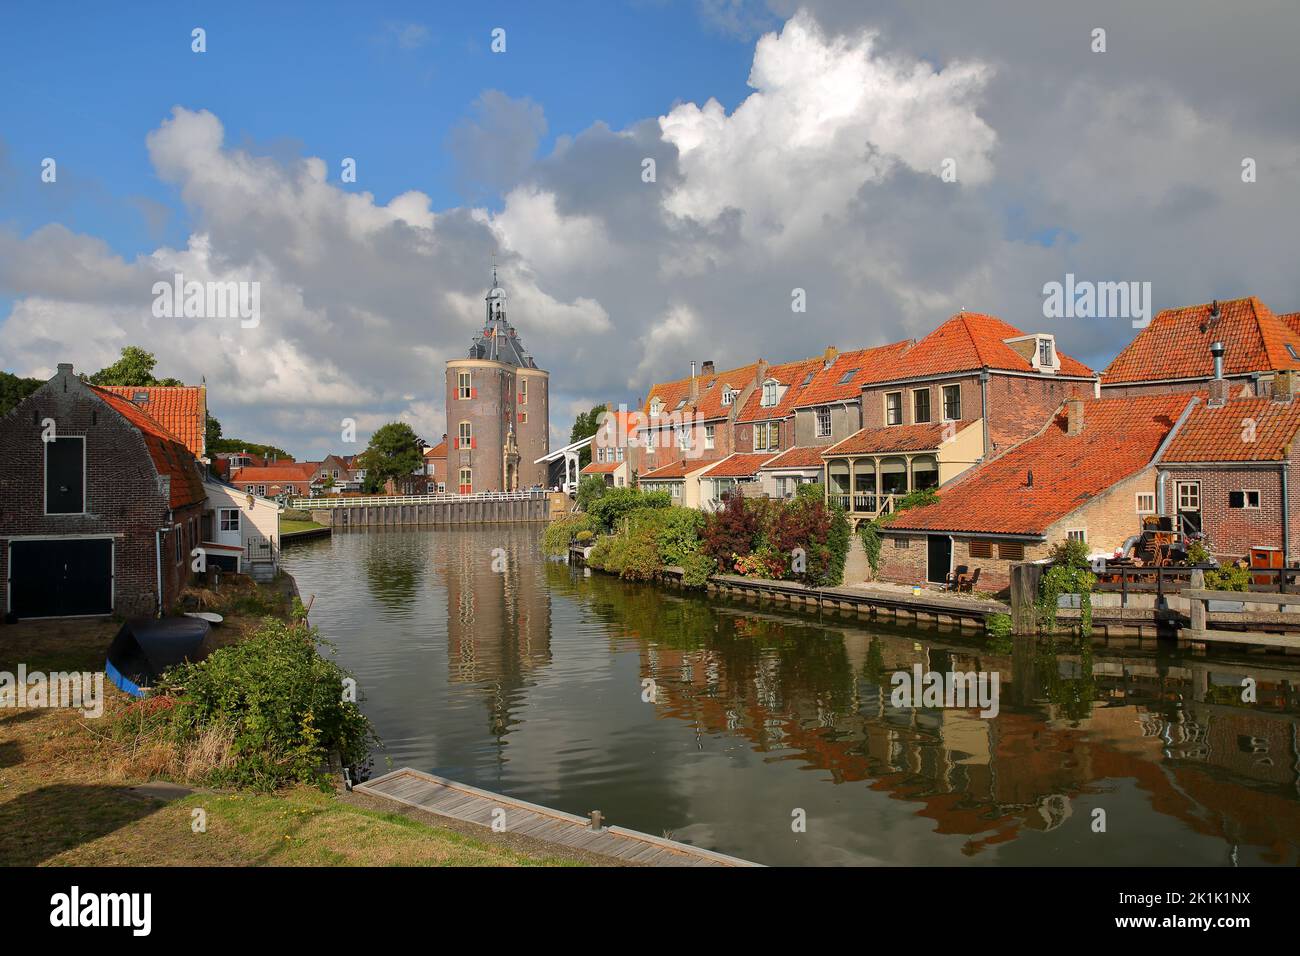 The historic center of Enkhuizen, West Friesland, Netherlands, with historic houses and the Drommedaris Gate Tower (dated from 1540) Stock Photo